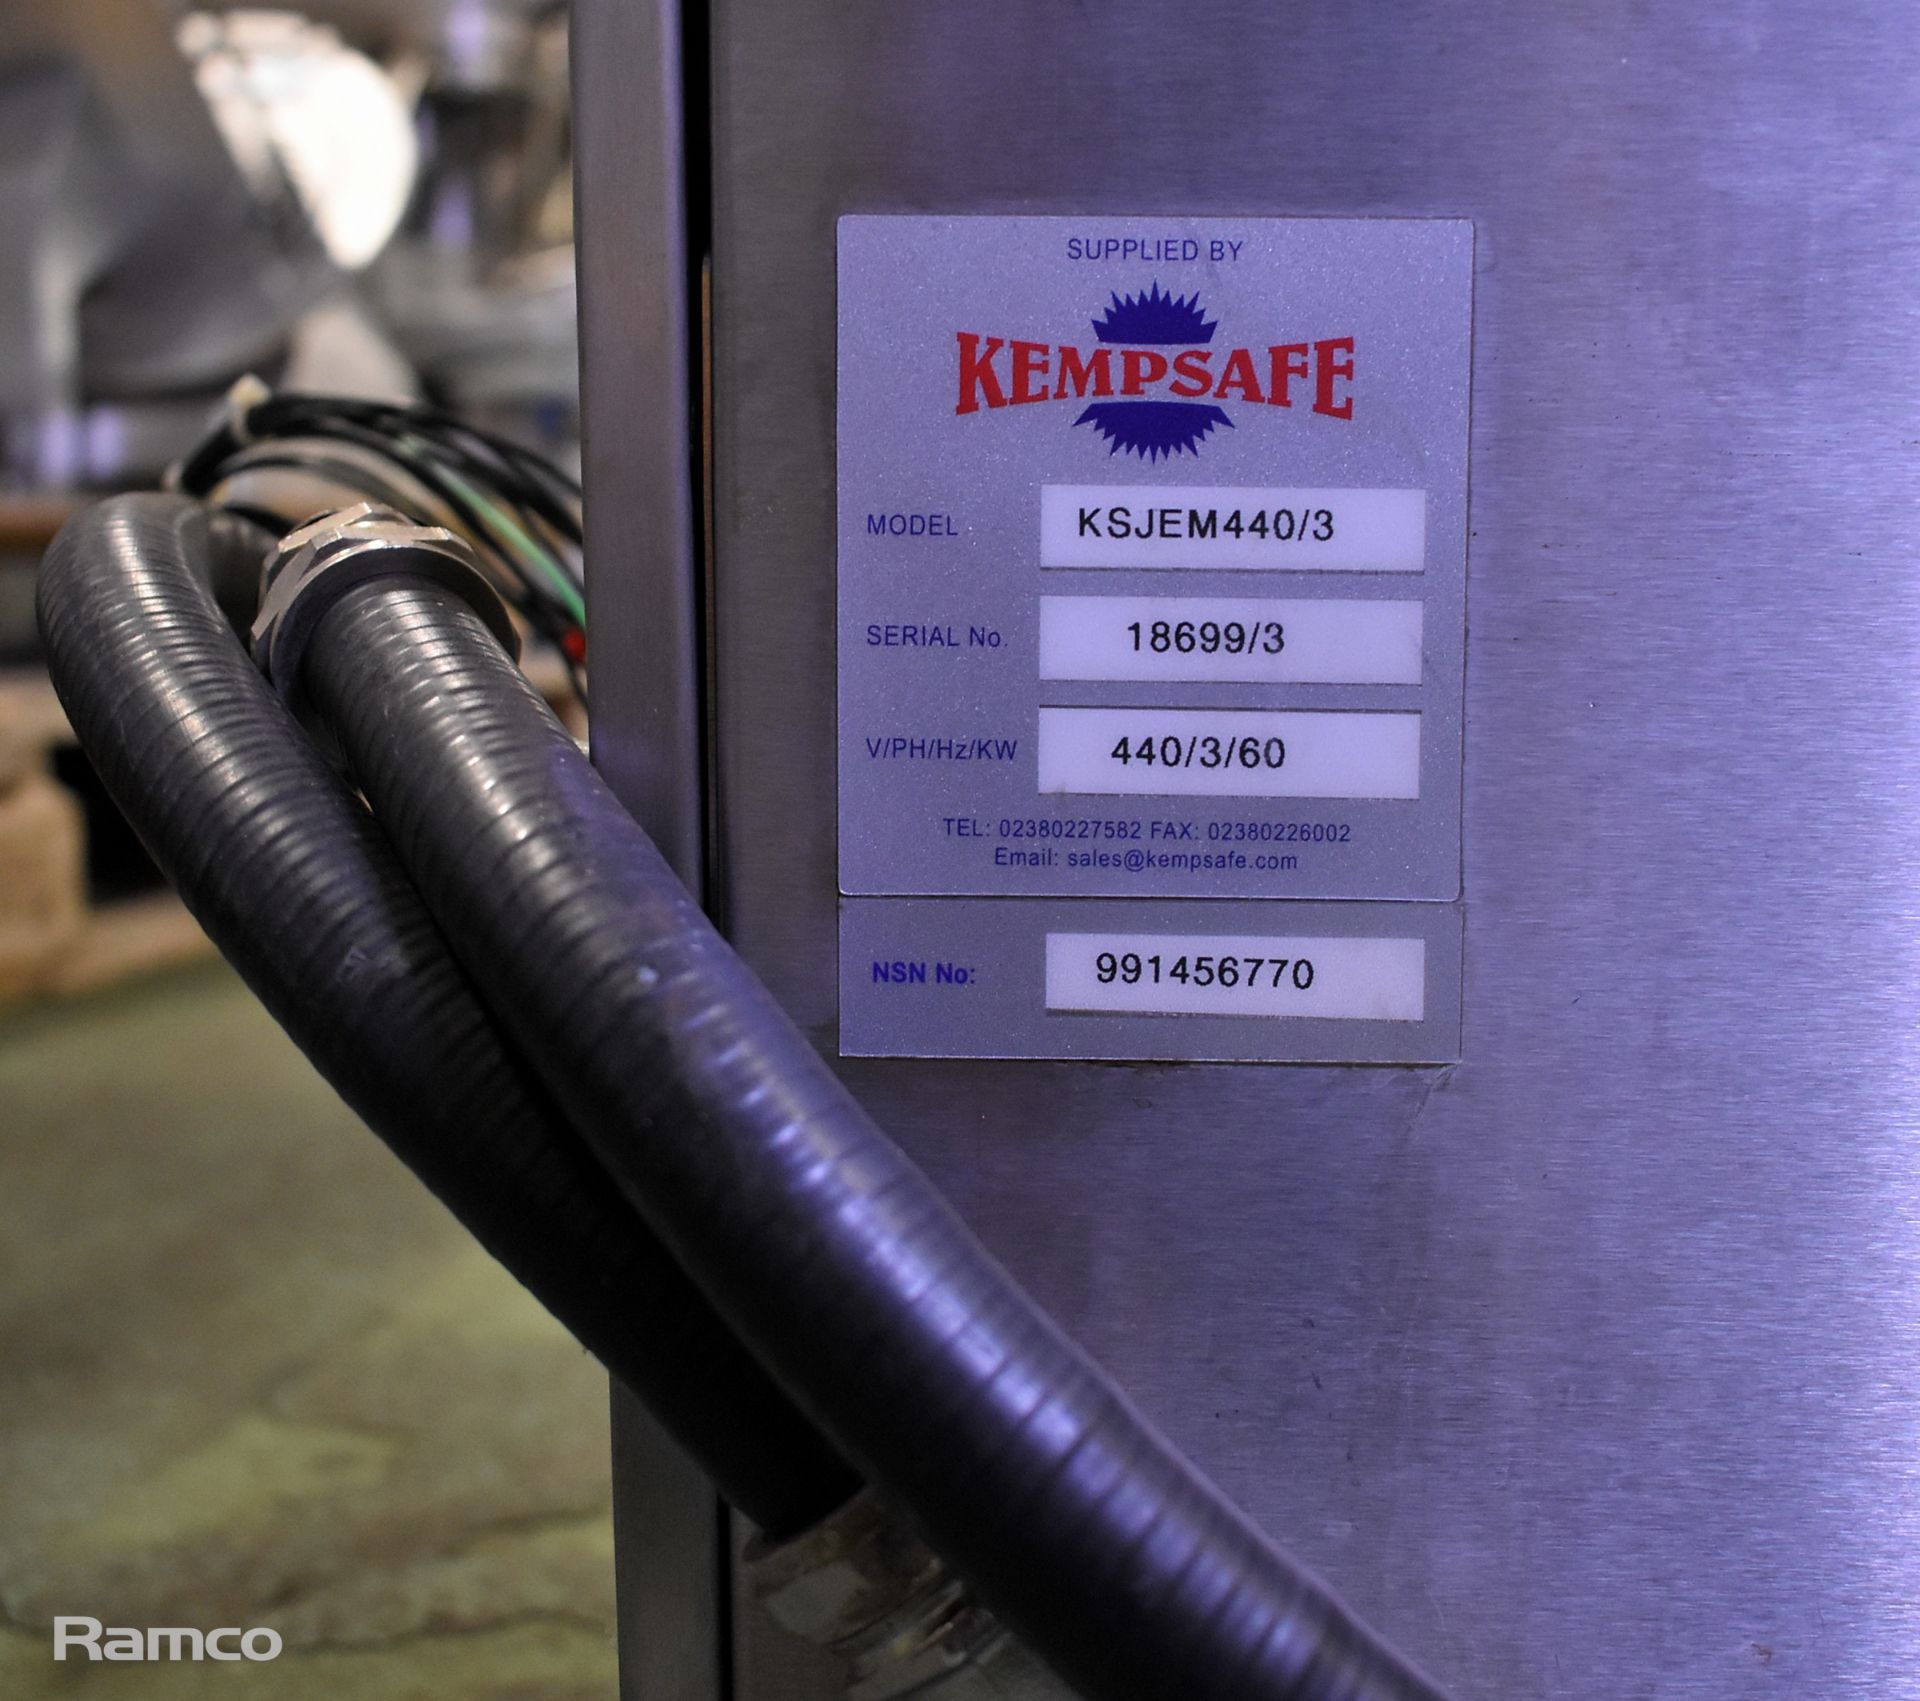 Kempsafe KSJEM440/3 stainless steel continuous water boiler/heater - Missing tap - 440V - 3ph - 60Hz - Image 4 of 4